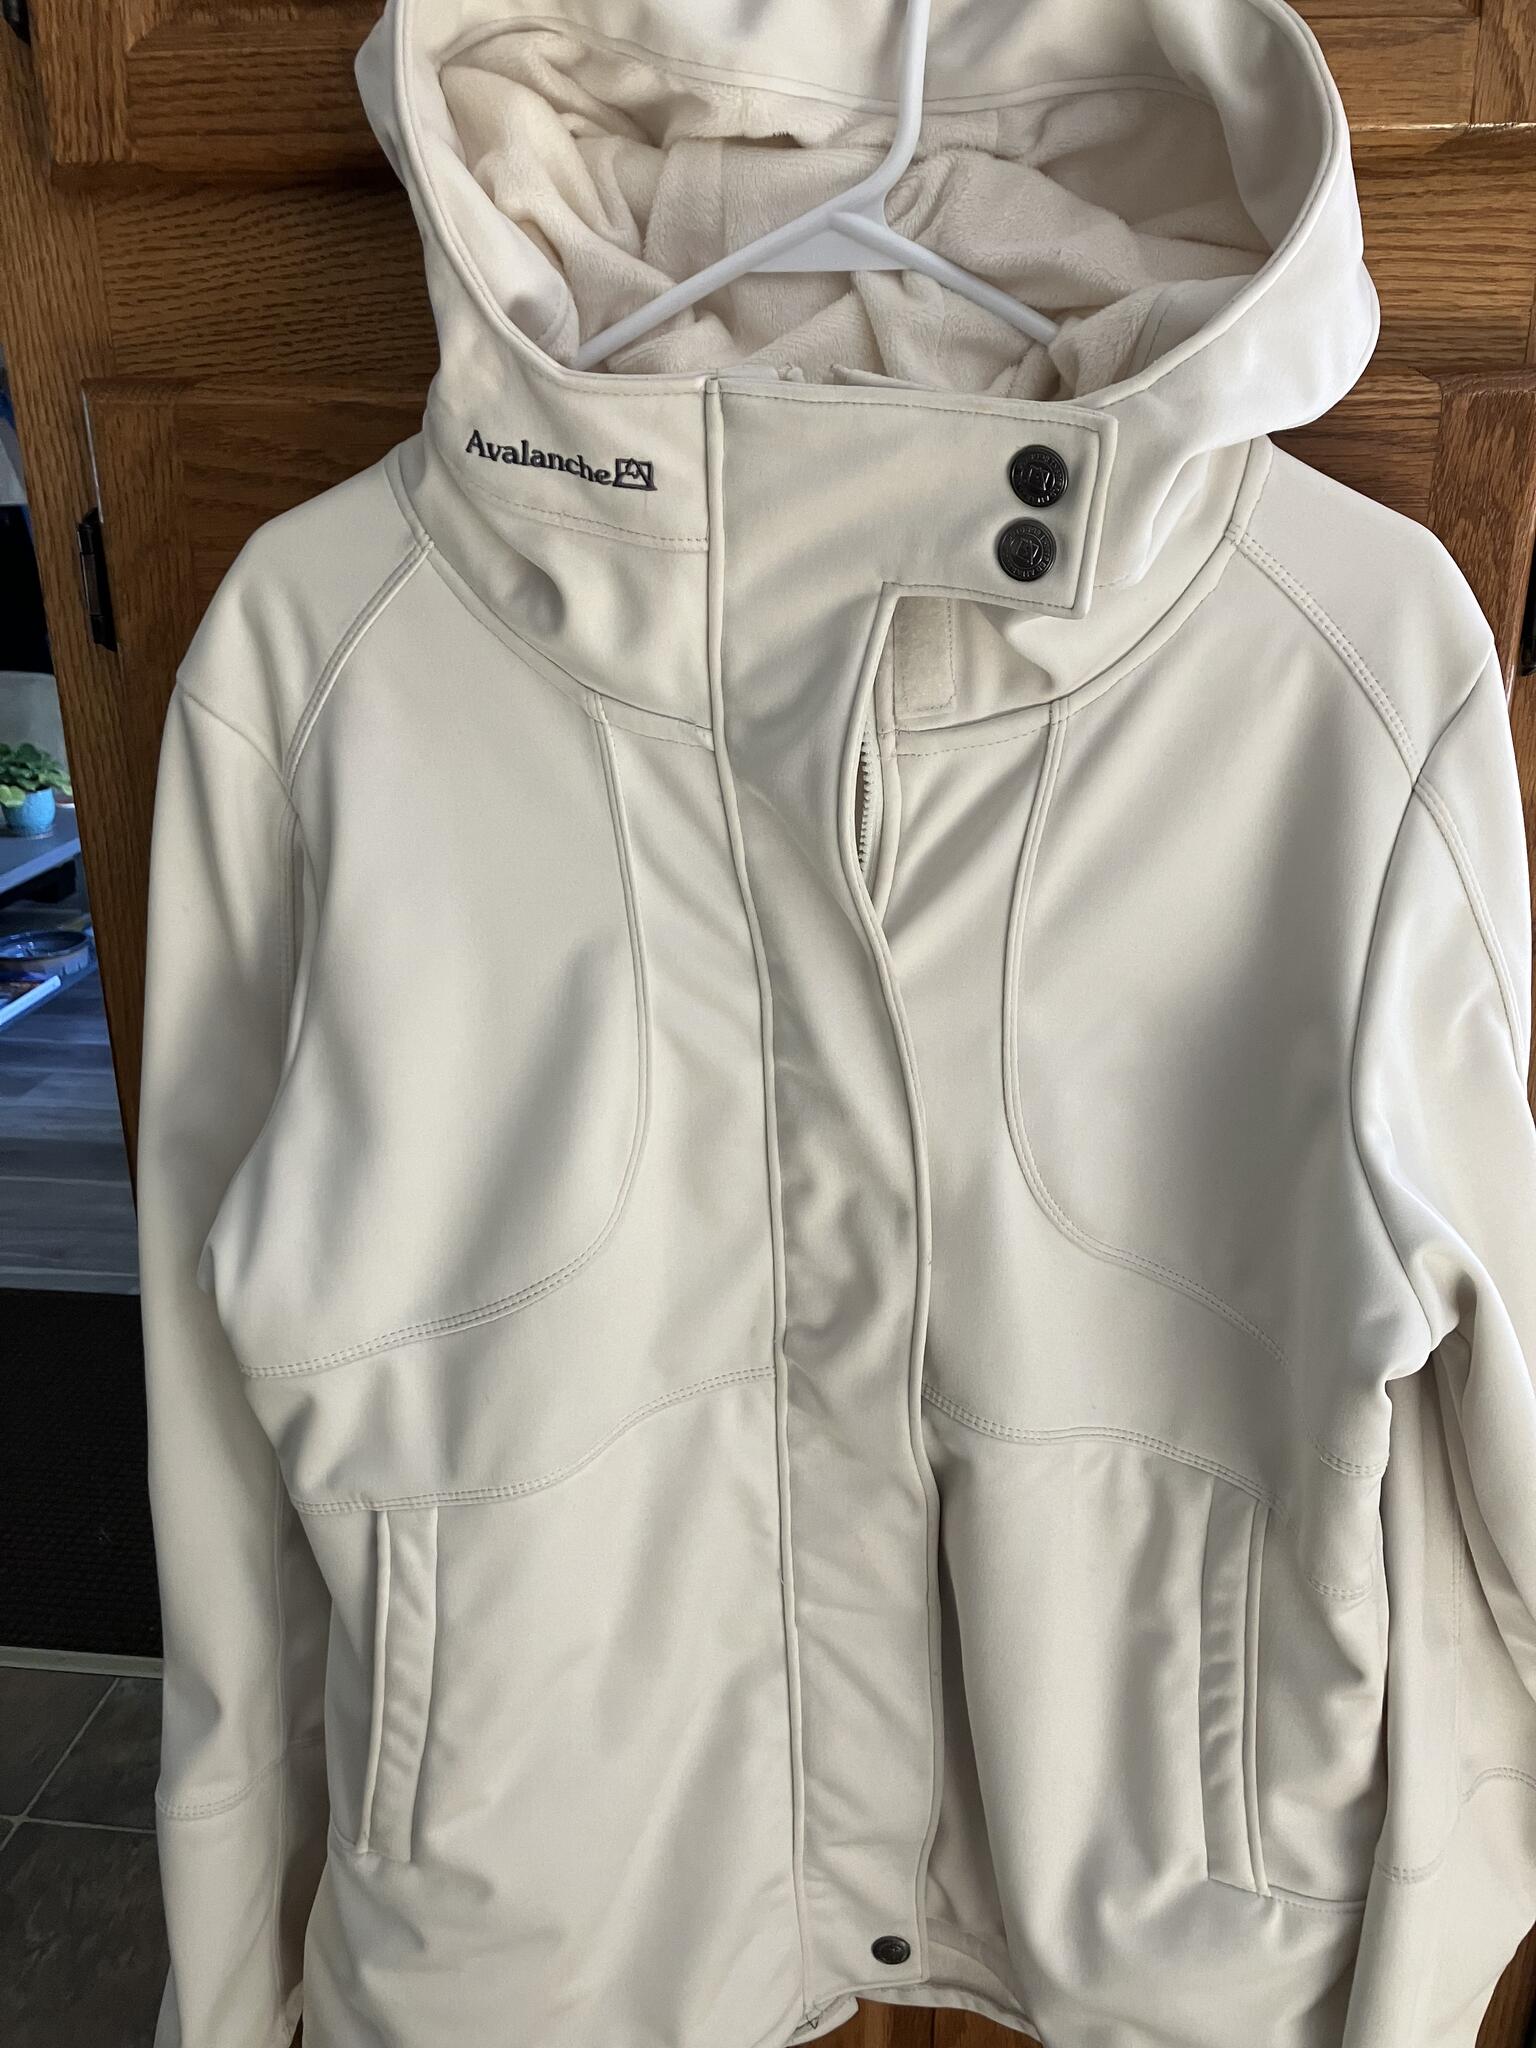 Women’s Avalanche winter jacket for $35 in Danvers, MA | For Sale ...